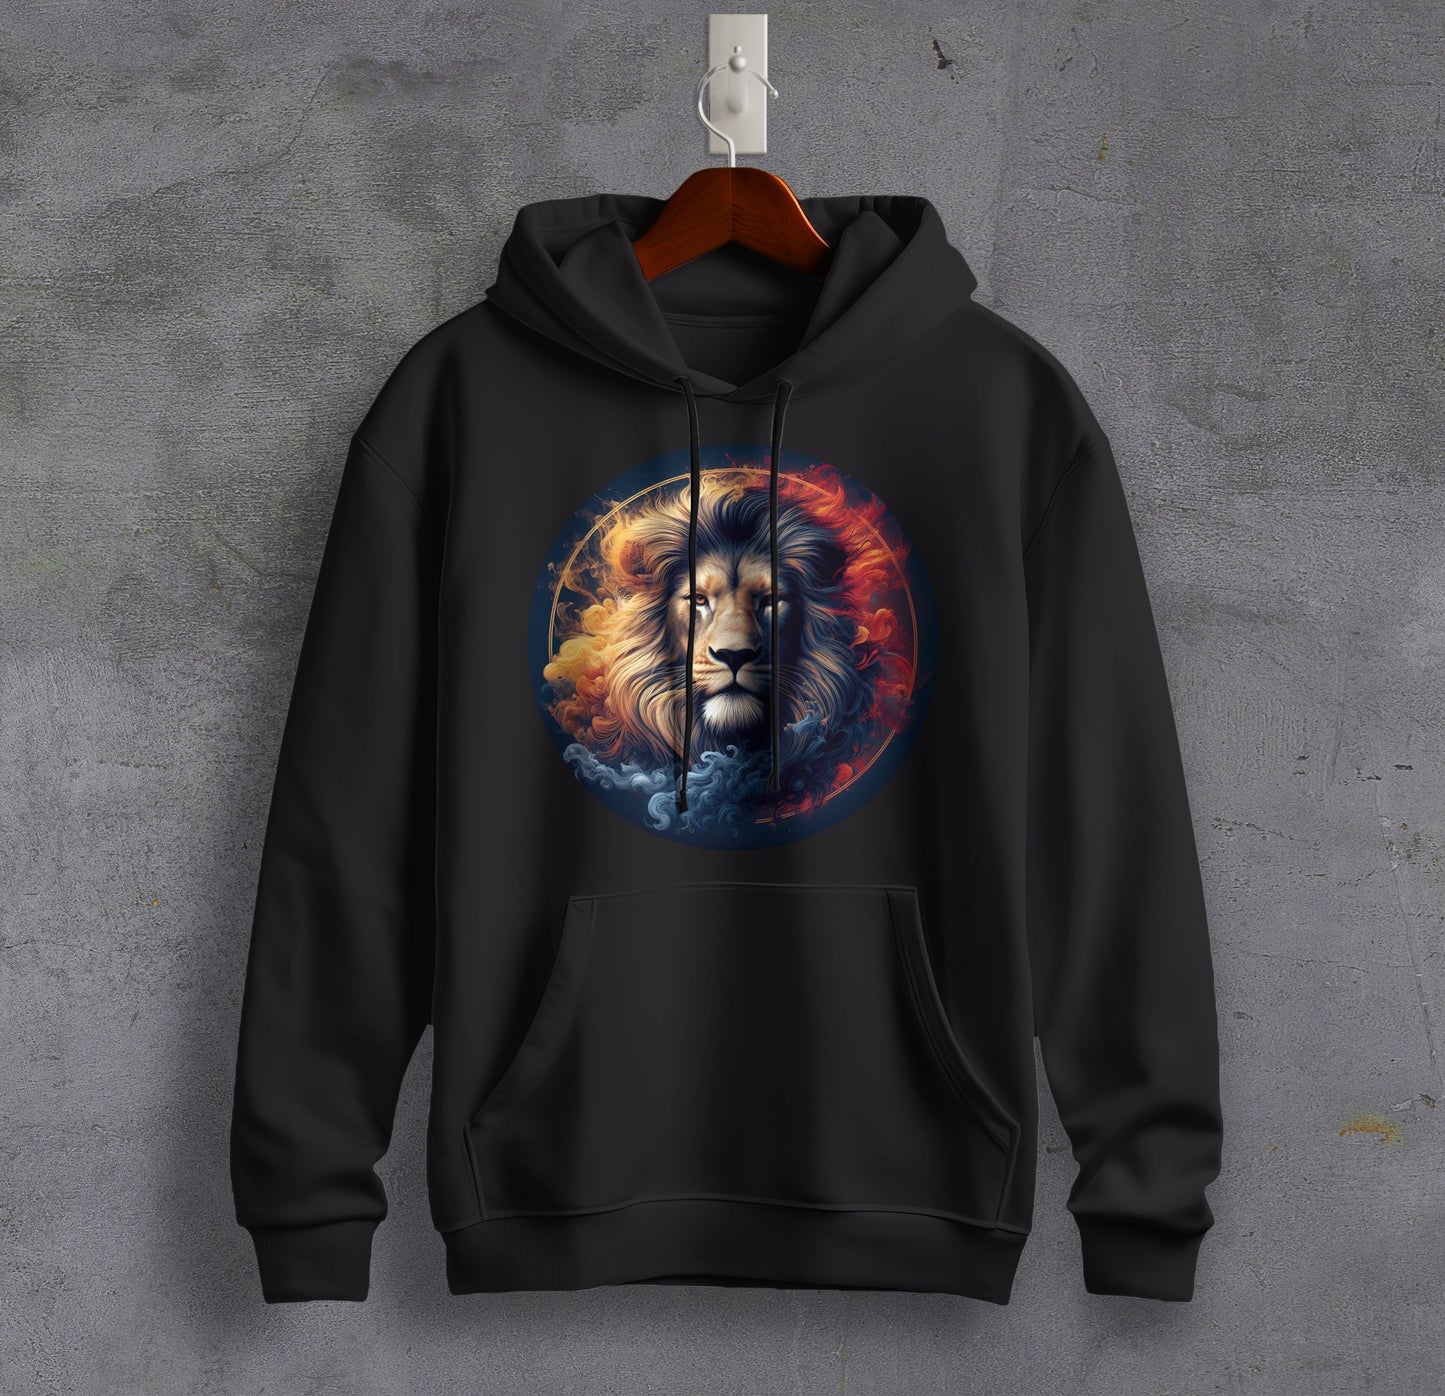 Lion's Strength - Graphic Printed Hooded Sweat Shirt for Men - Cotton - Magnificence of India Sweat Shirt